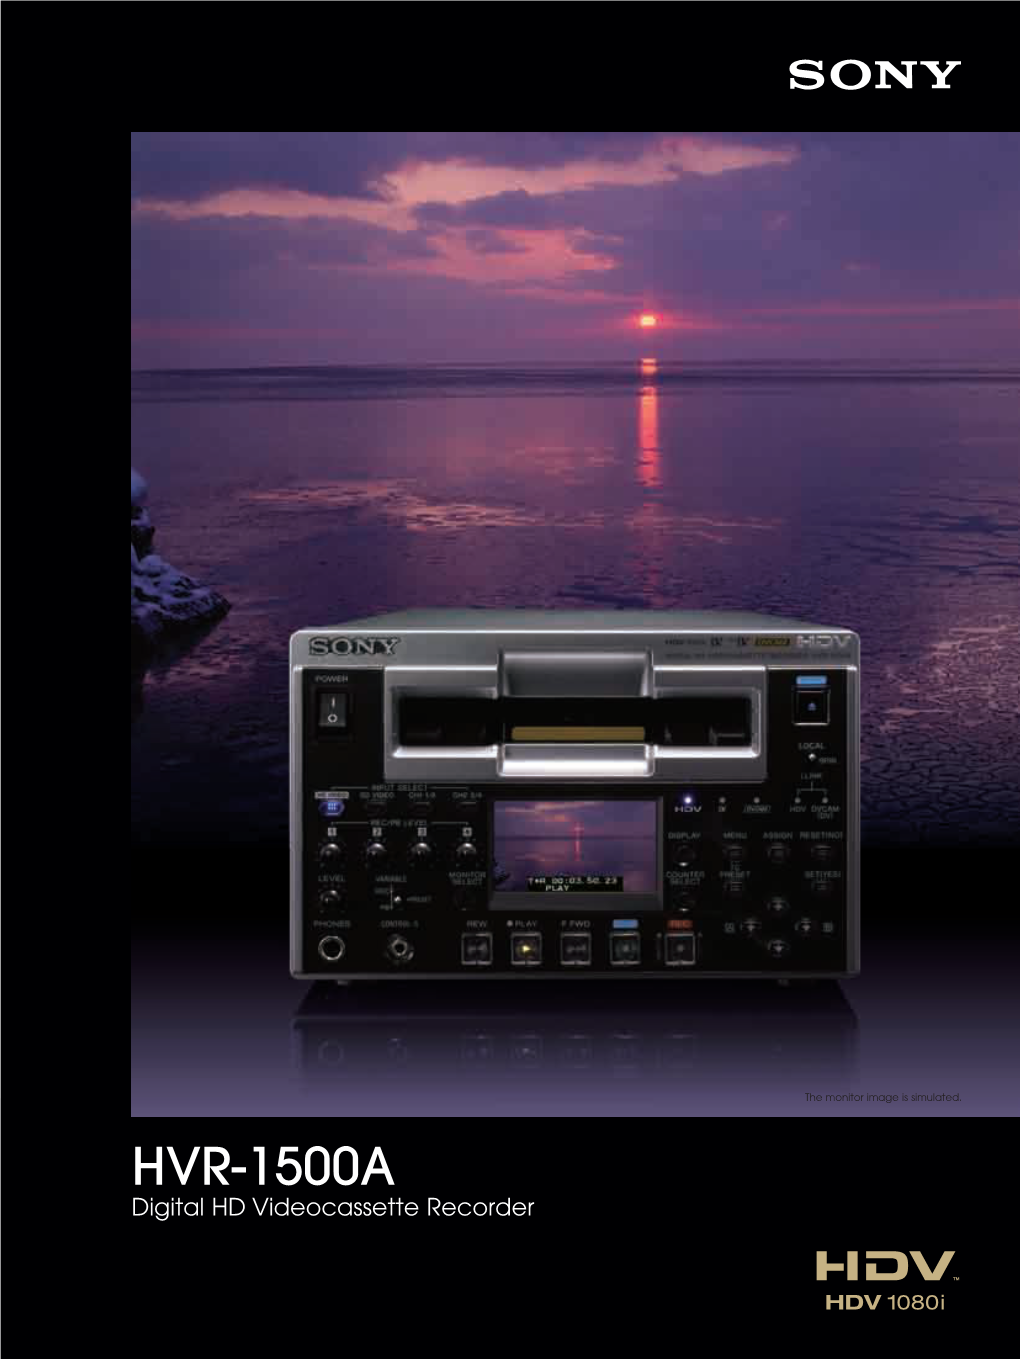 HVR-1500A Are Digital HD Videocassette Recorder Ny of 9667 Sony214 HVR 08 10/16/09 12:08 PM Page 2